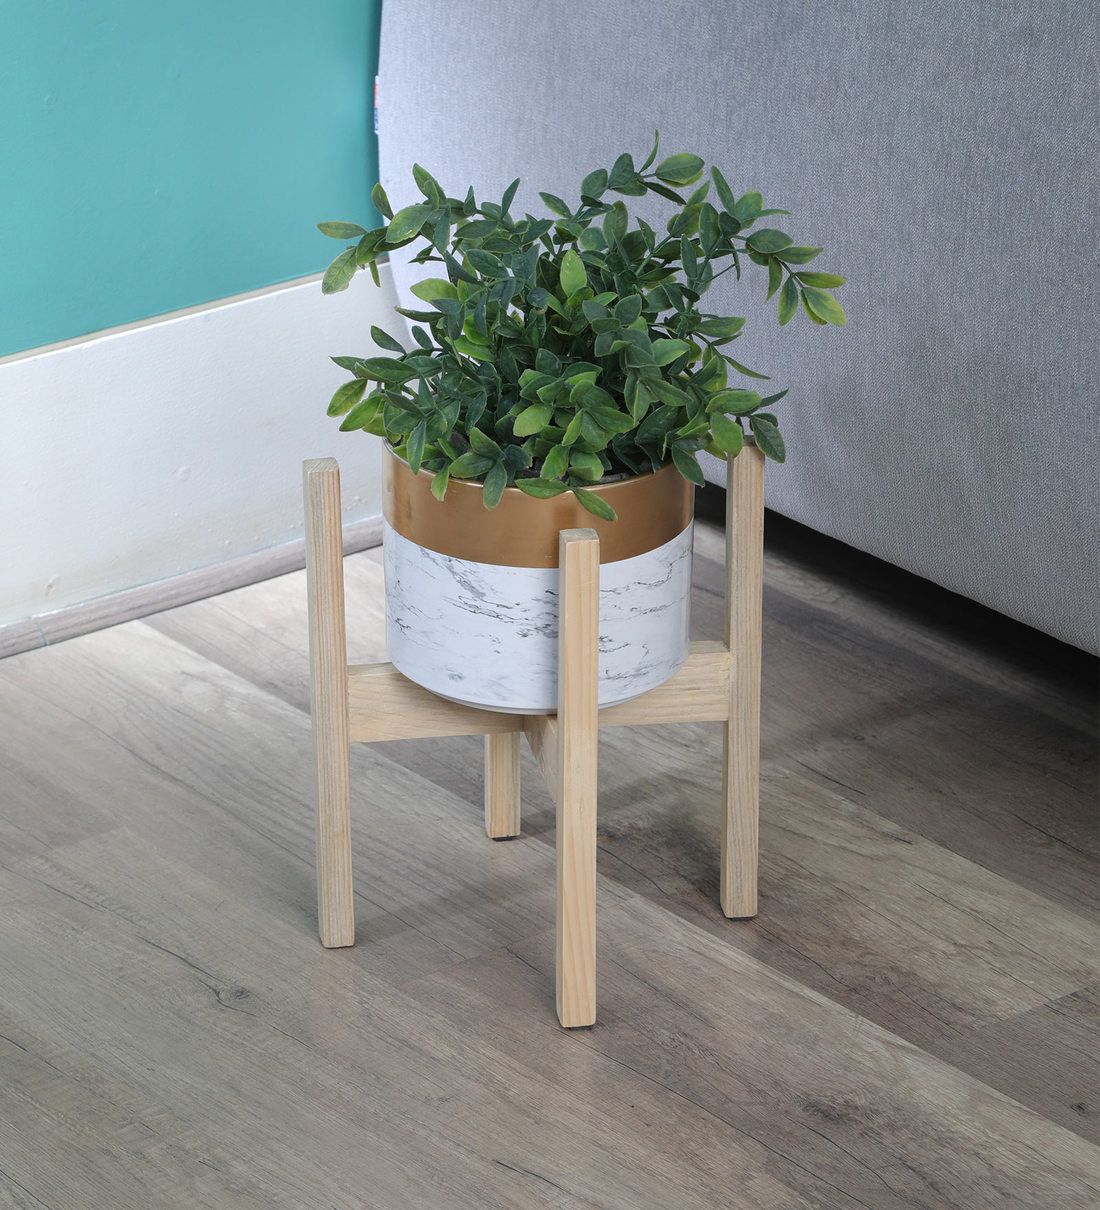 Buy Wooden Planter Standlycka Online – Wooden Planter Stands – Pots &  Planters – Home Decor – Pepperfry Product Throughout Wood Plant Stands (View 15 of 15)